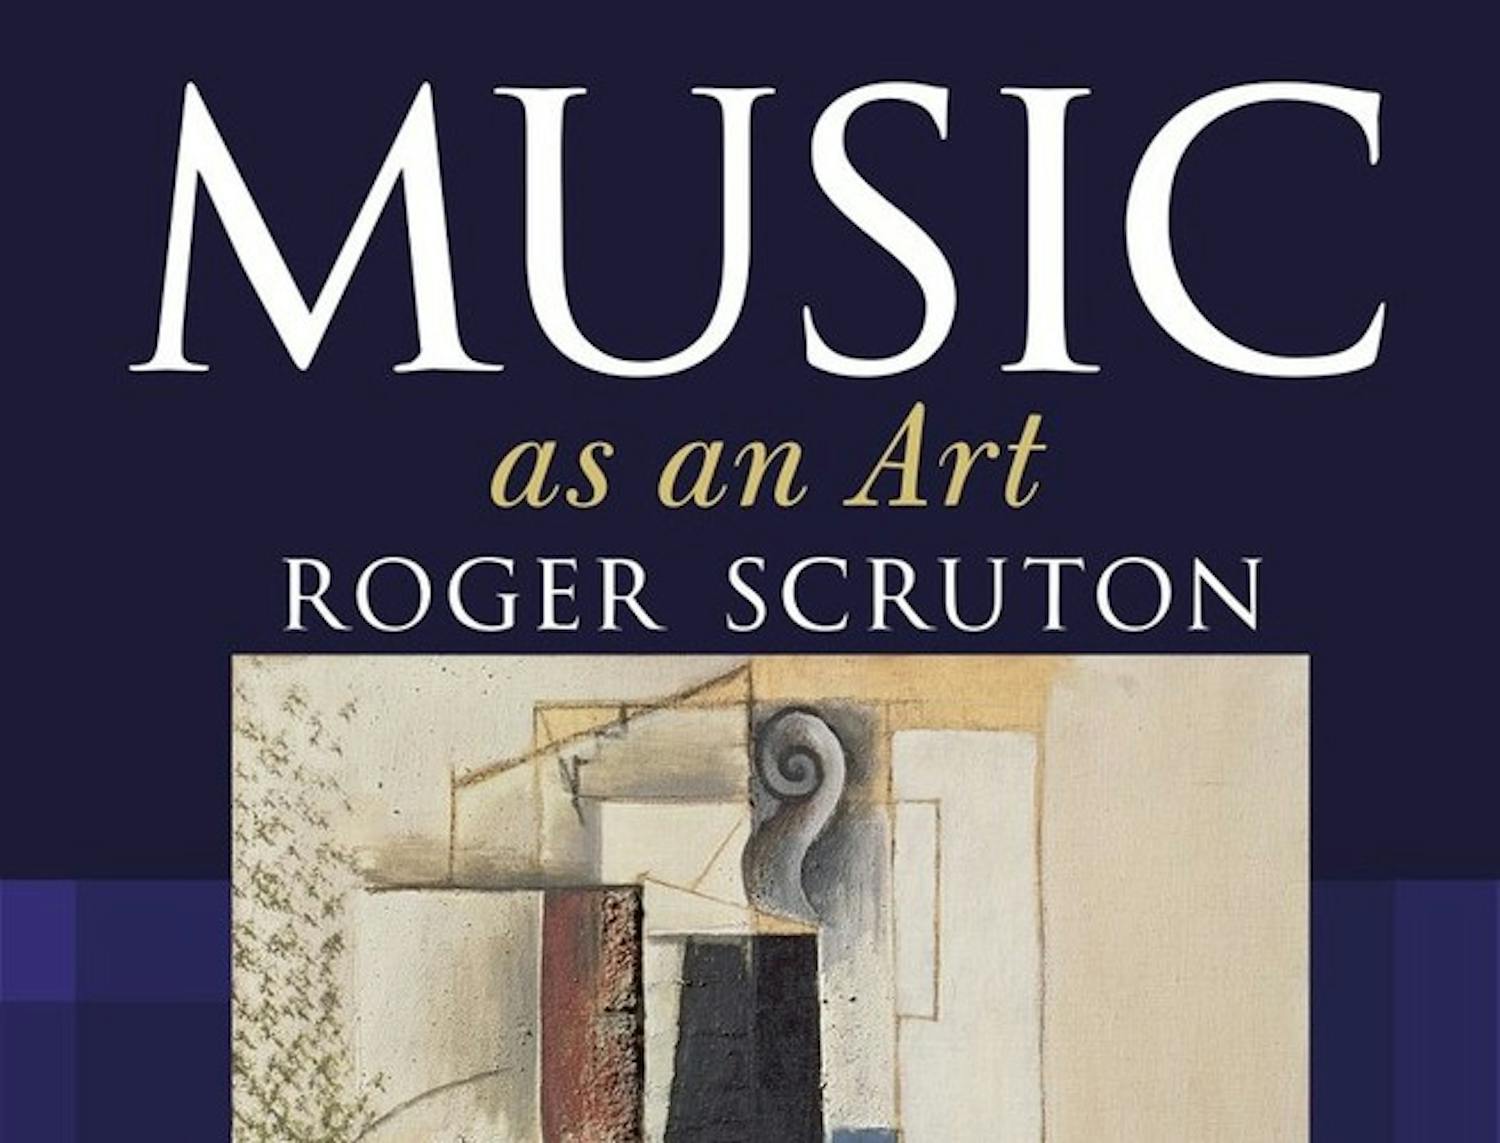 Chapter 239: 'Music as an Art' with Roger Scruton